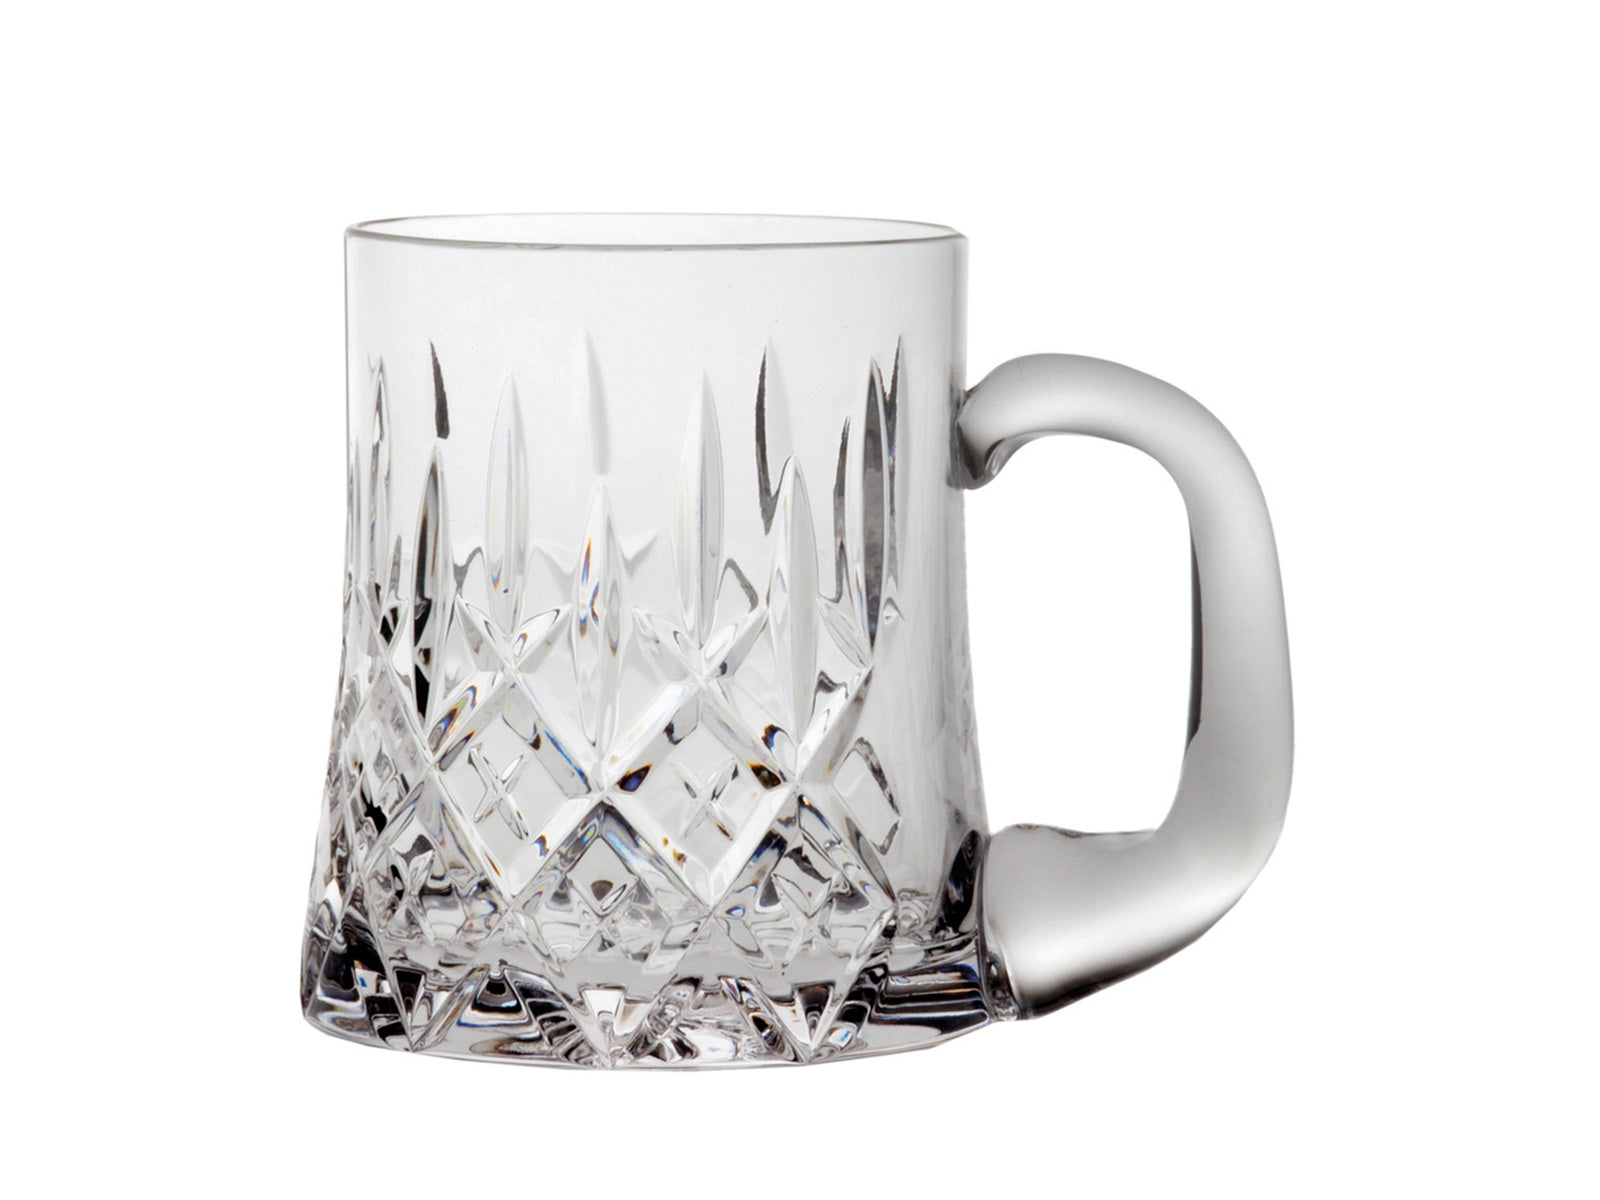 This Royal Scot Crystal London Tankard - Medium has been hand-cut by expert artisans with the elegant single-flicked London design. Smaller than a pint glass, this tankard is ideal for decanting your bottled brews into to enjoy them in style.